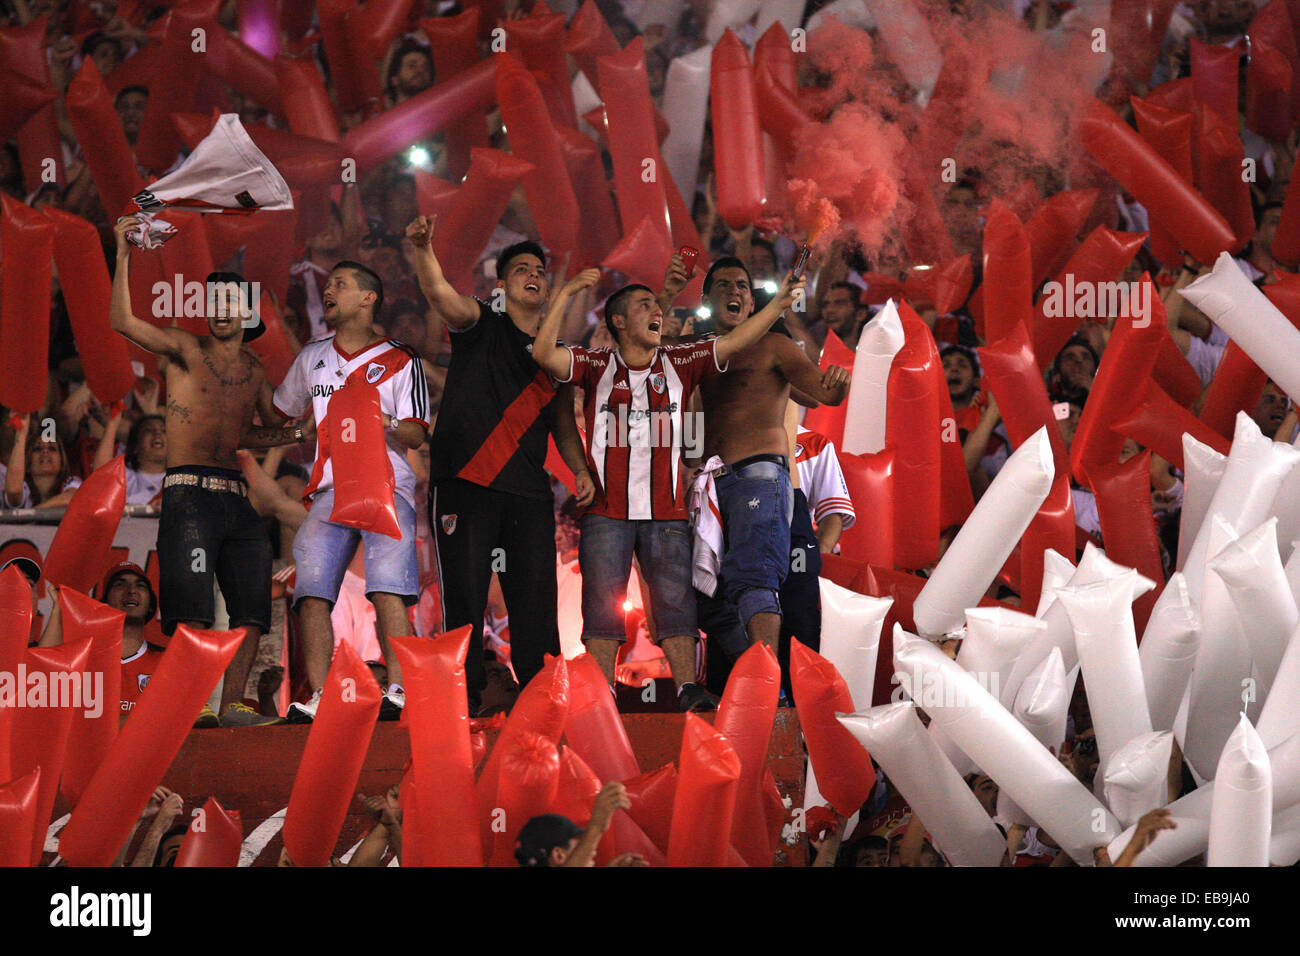 Buenos Aires, Argentina. 27th Nov, 2014. River Plate's fans react during the semifinal match of the South American Cup, against Boca Juniors, held at Antonio Vespucio Liberti Stadium, in Buenos Aires, Argentina, on Nov. 27, 2014. © Martin Zabala/Xinhua/Alamy Live News Stock Photo